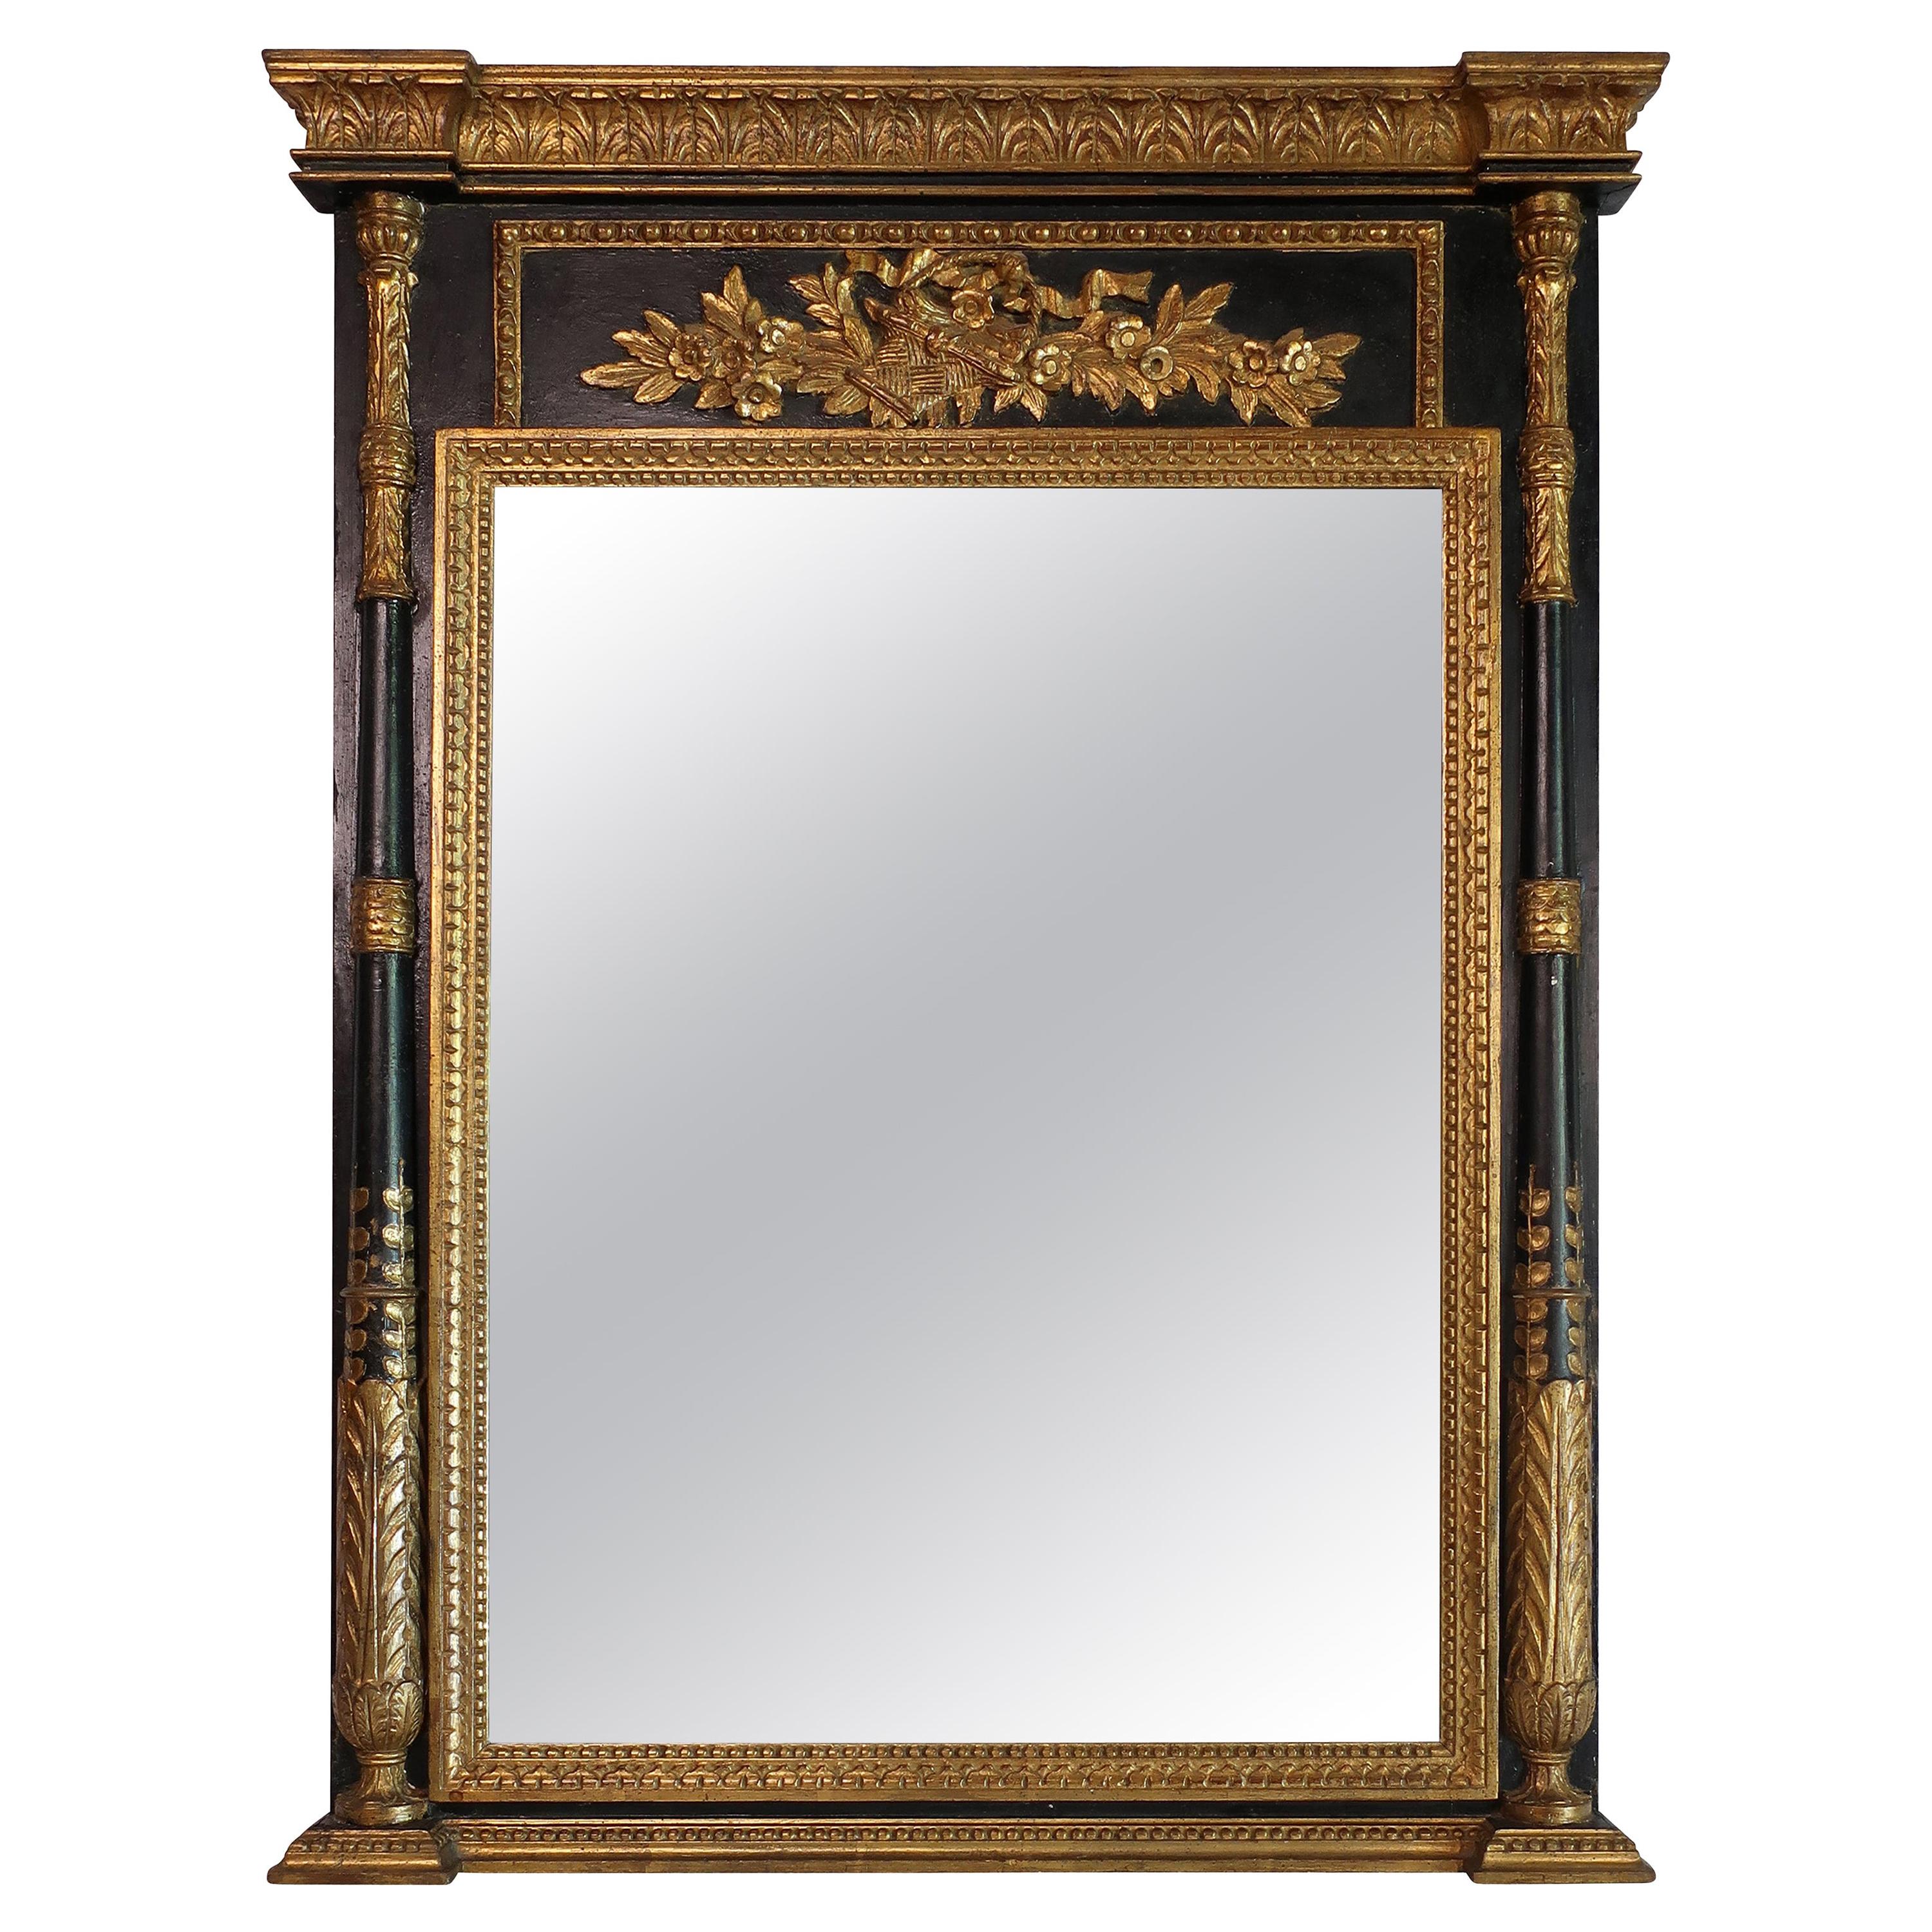 Neoclassical Parcel-Gilt Mirror with Finely Carved Giltwood Columns